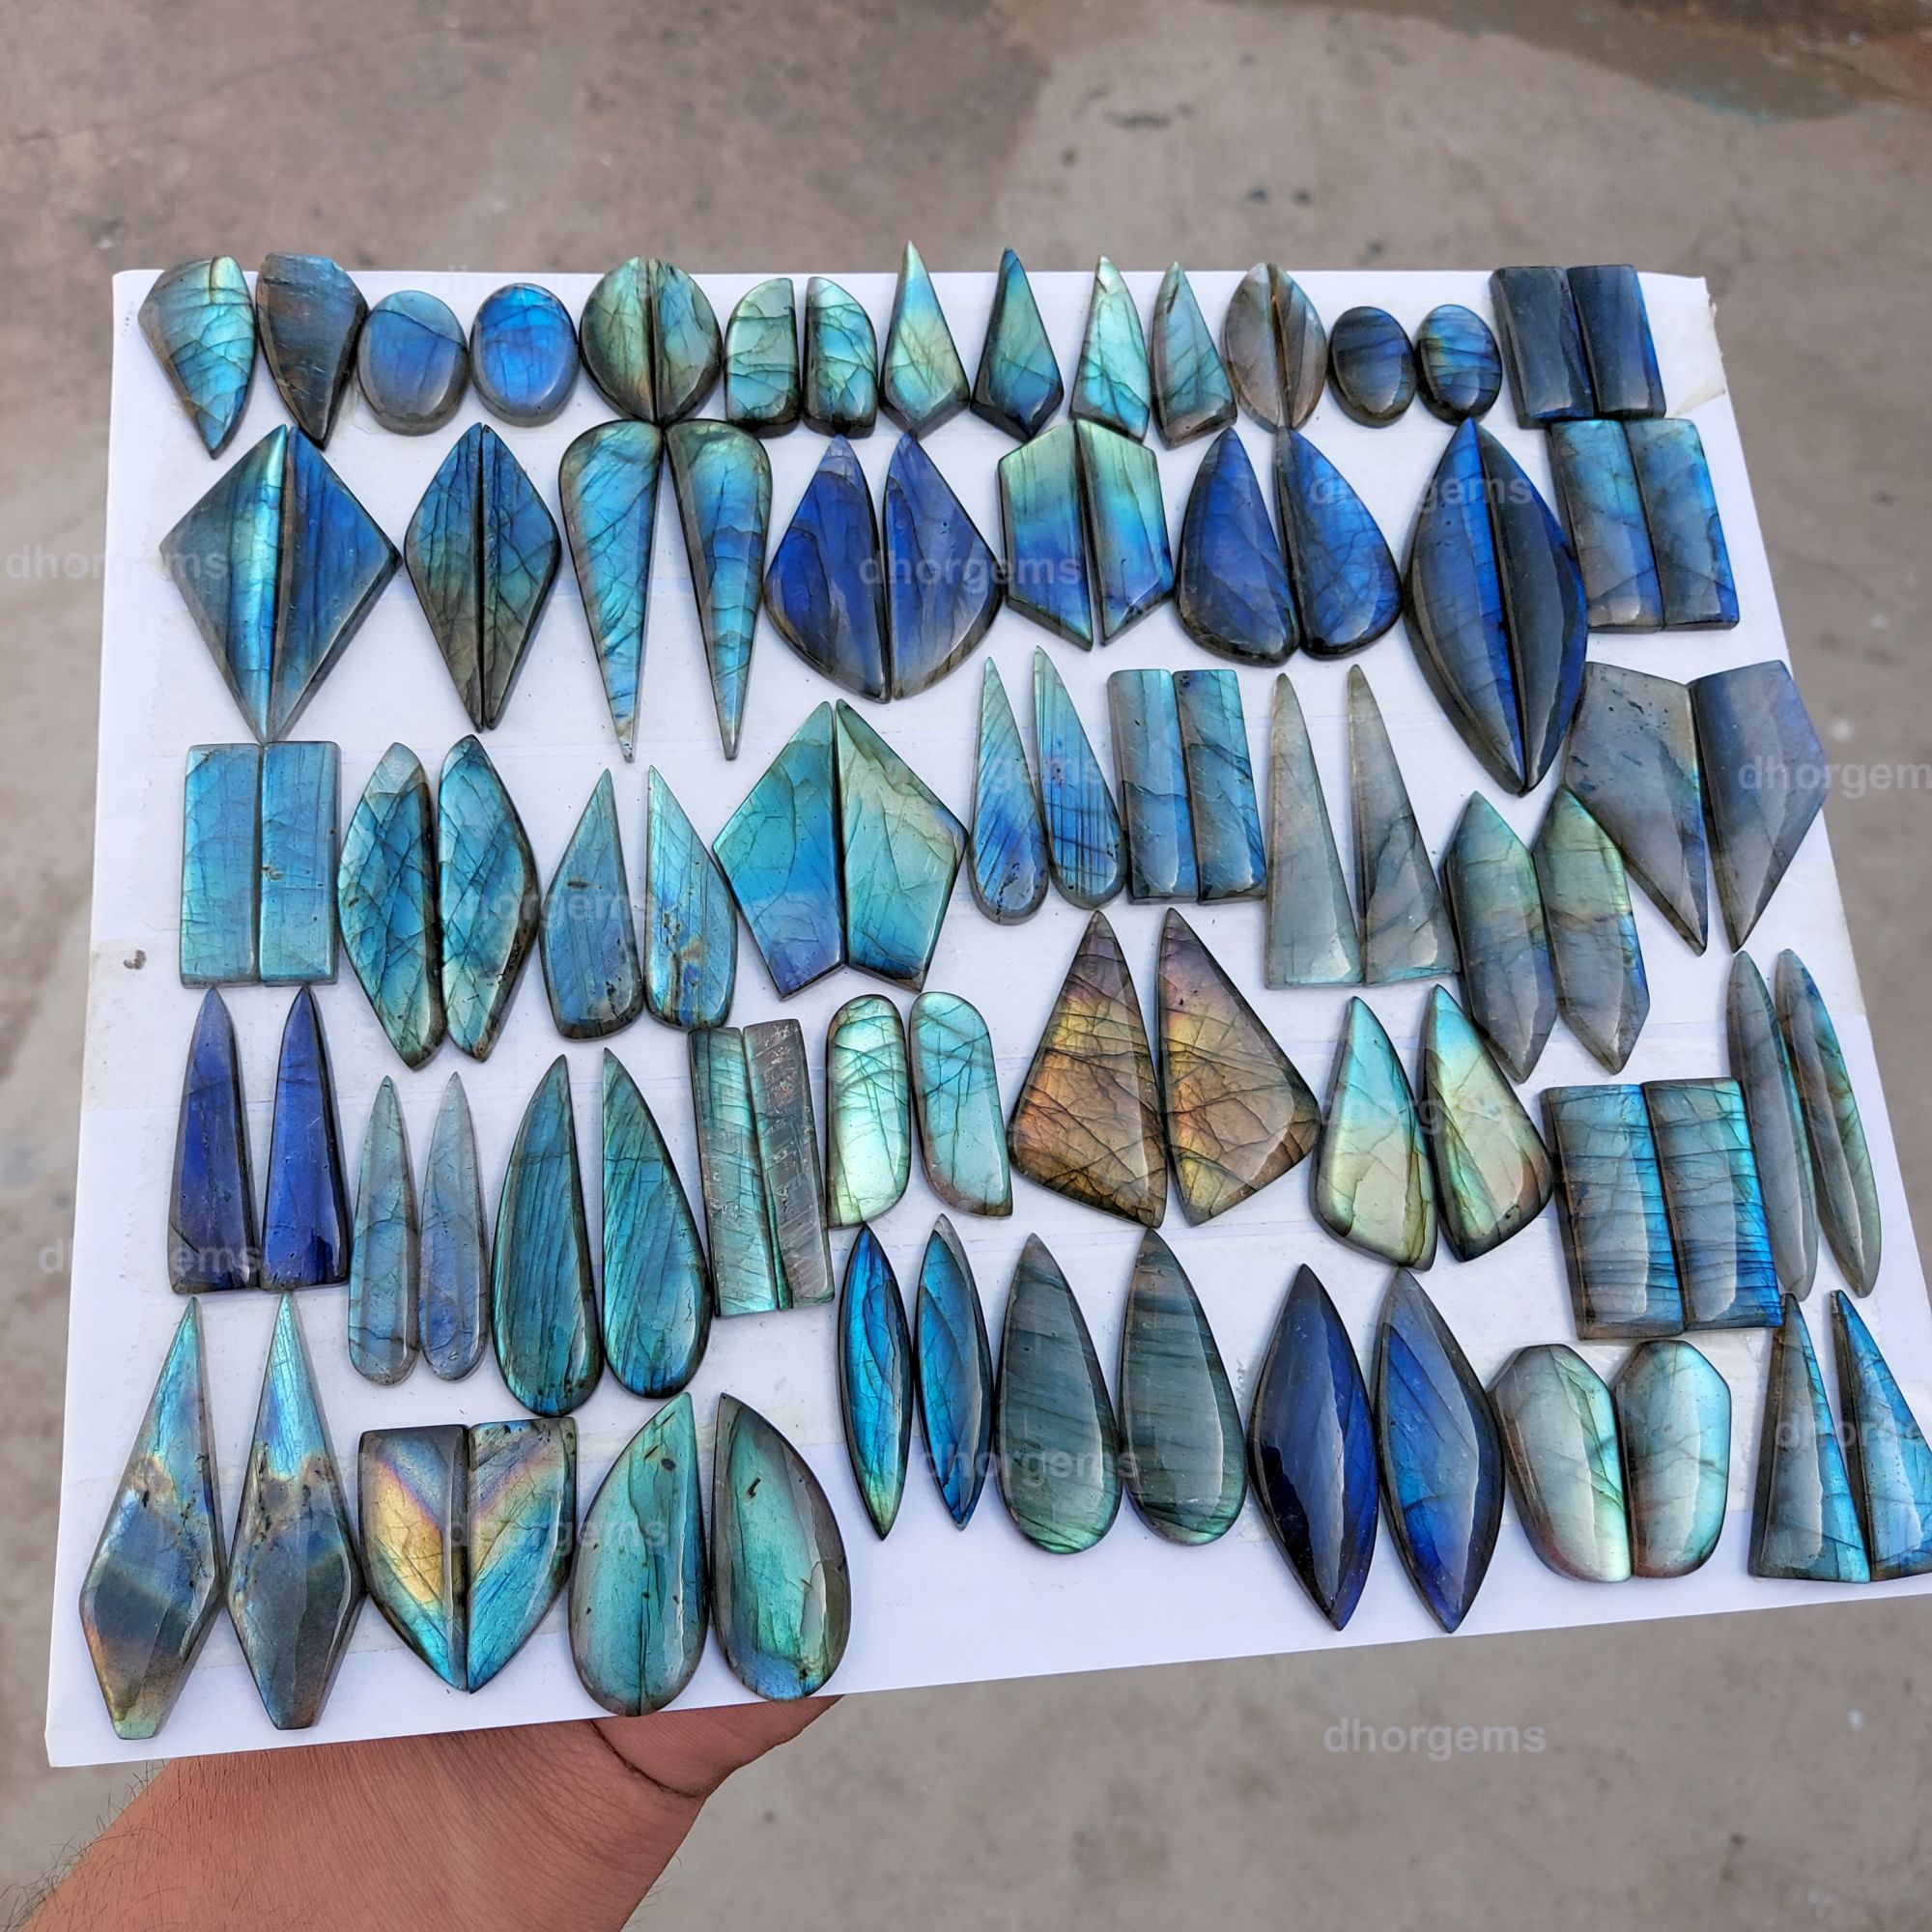 Reserved for beads n shine design(43 pairs labradorite front to back drill) express shipping